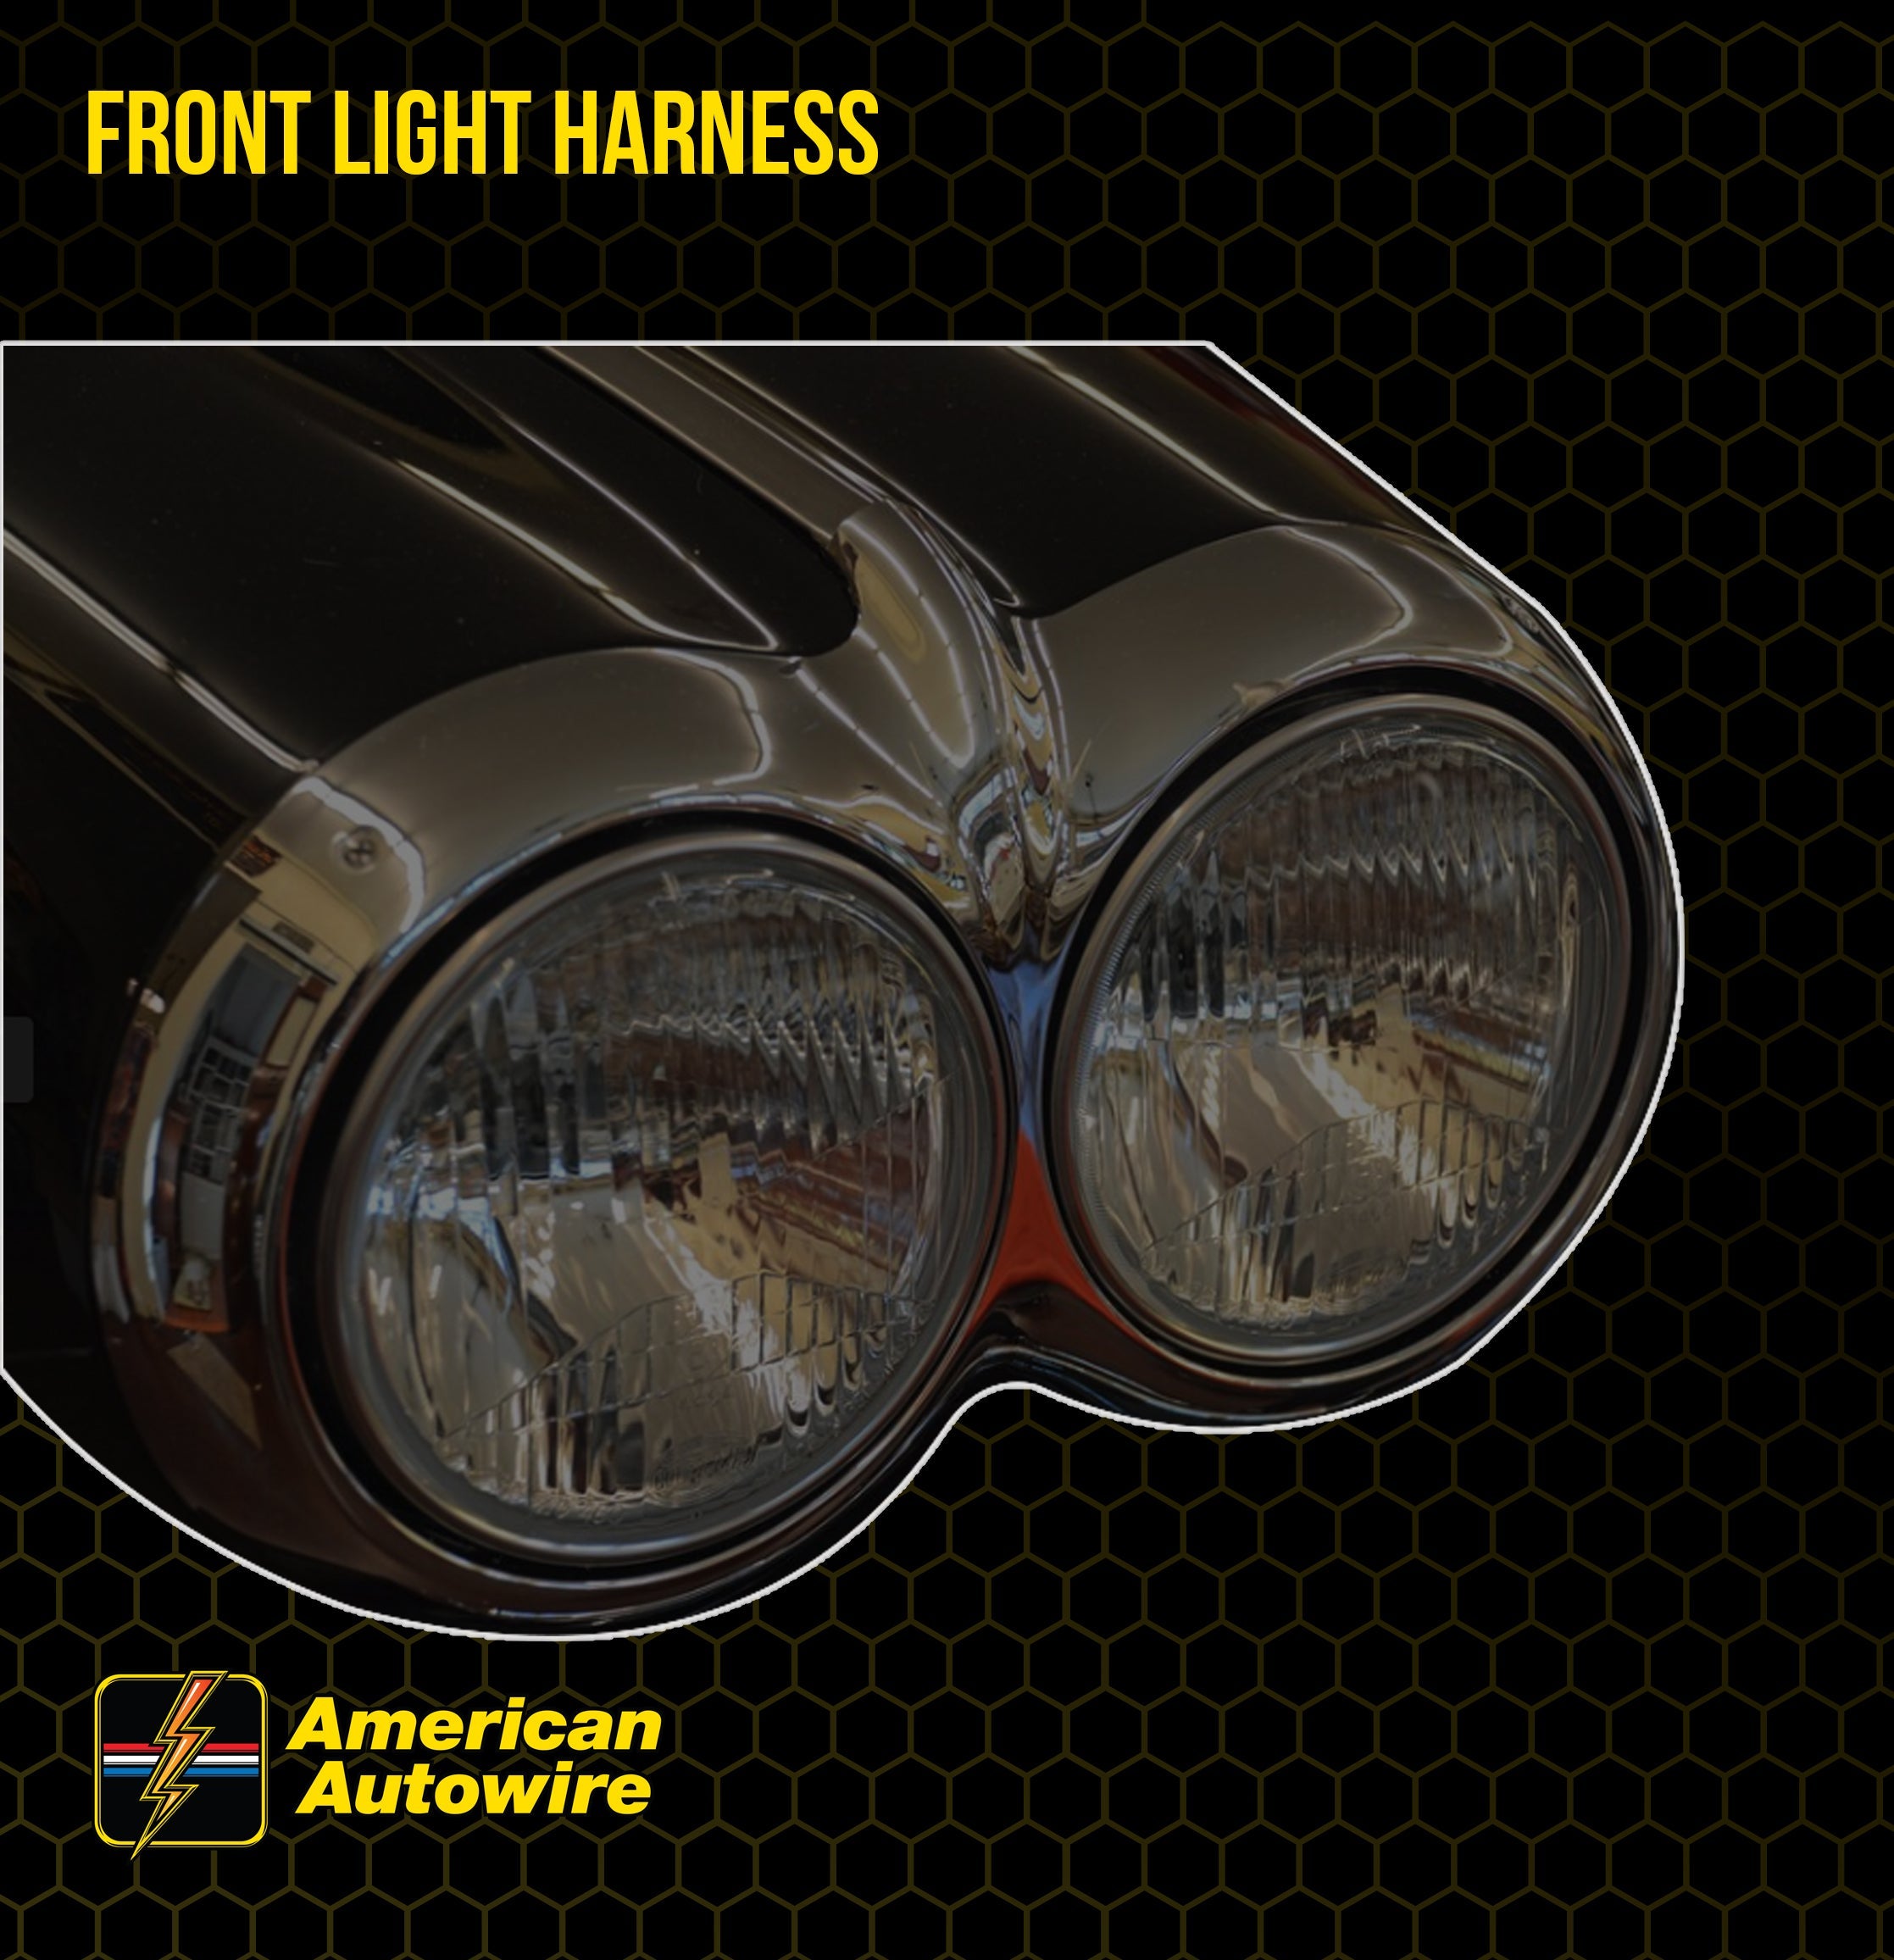 american-autowire, Front Light Harness - Altpi